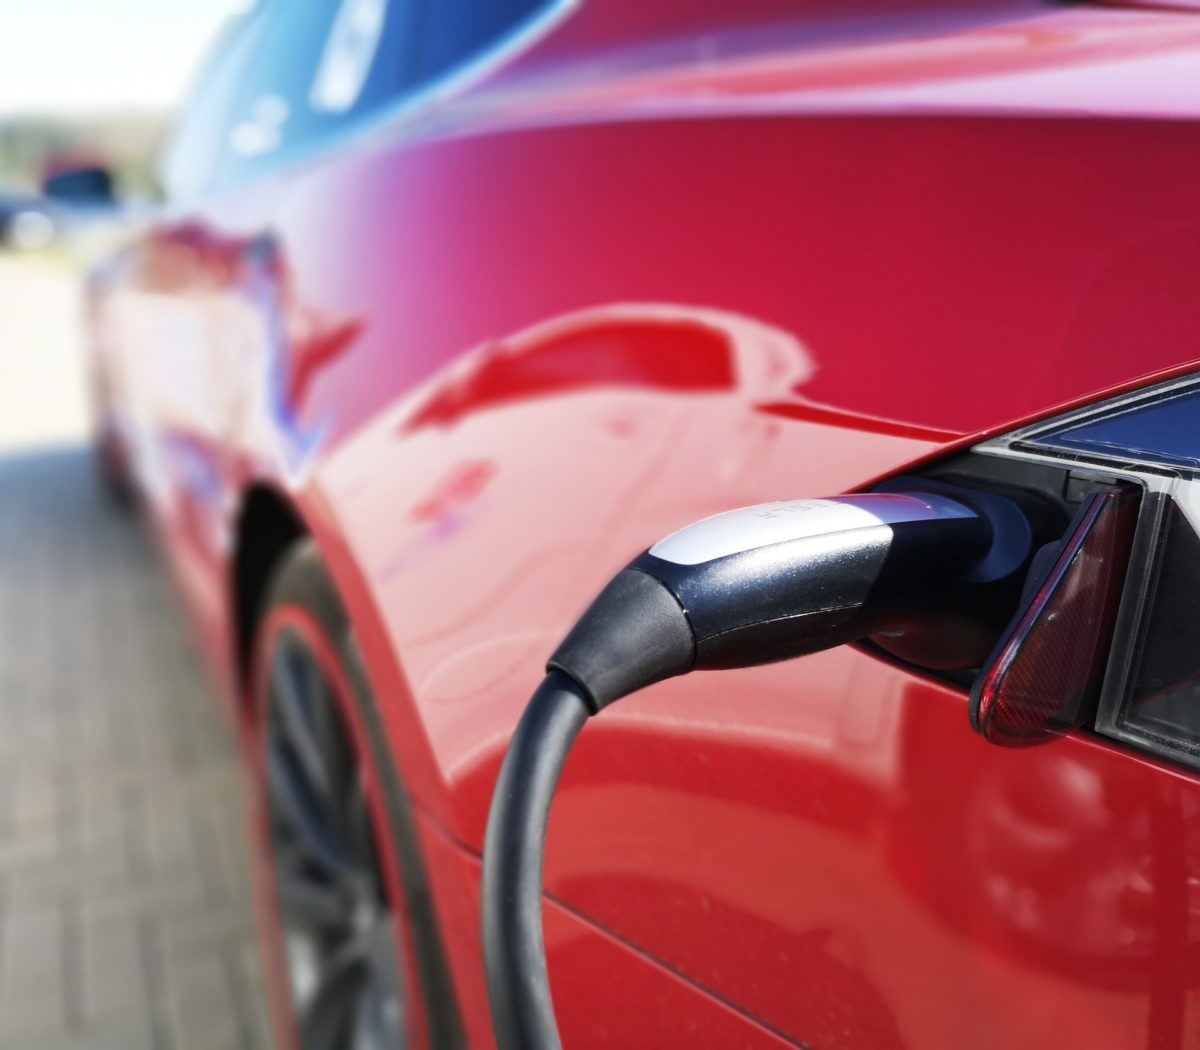 The NEXT EV Charger launched for both private and commercial use